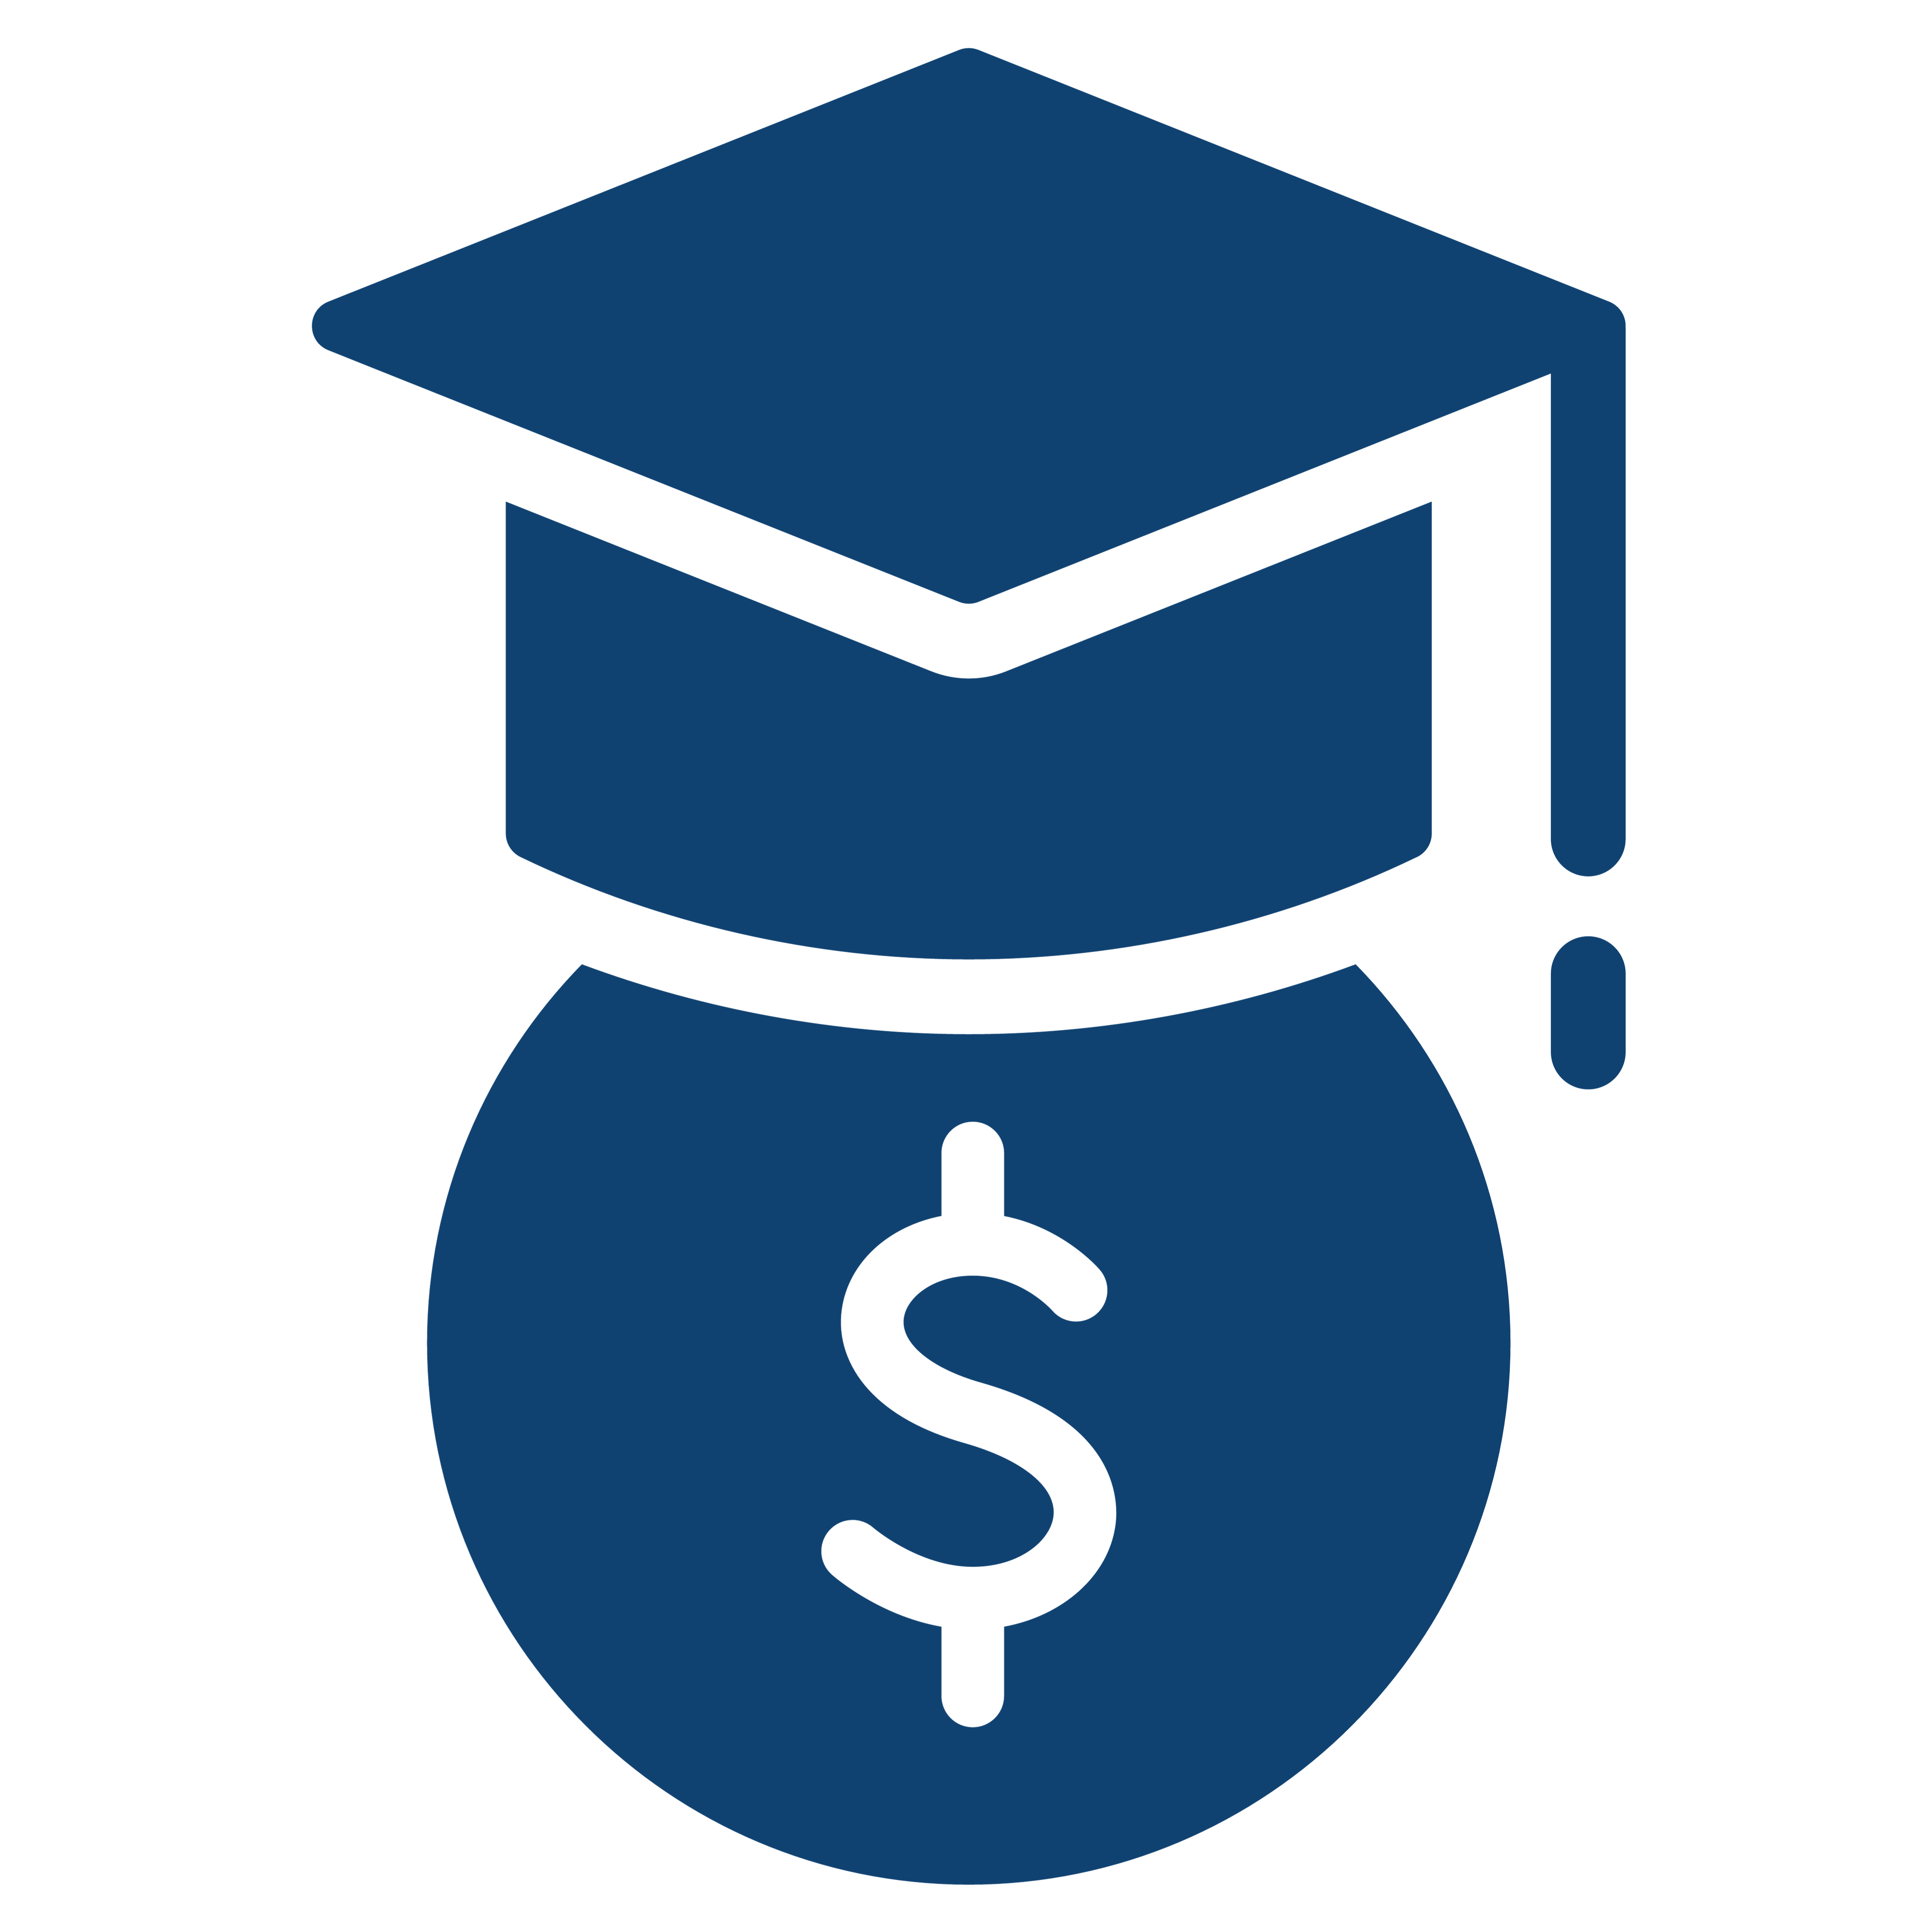 Tuition Benefits - Enhance your skills and receive tuition reimbursement for job related courses.